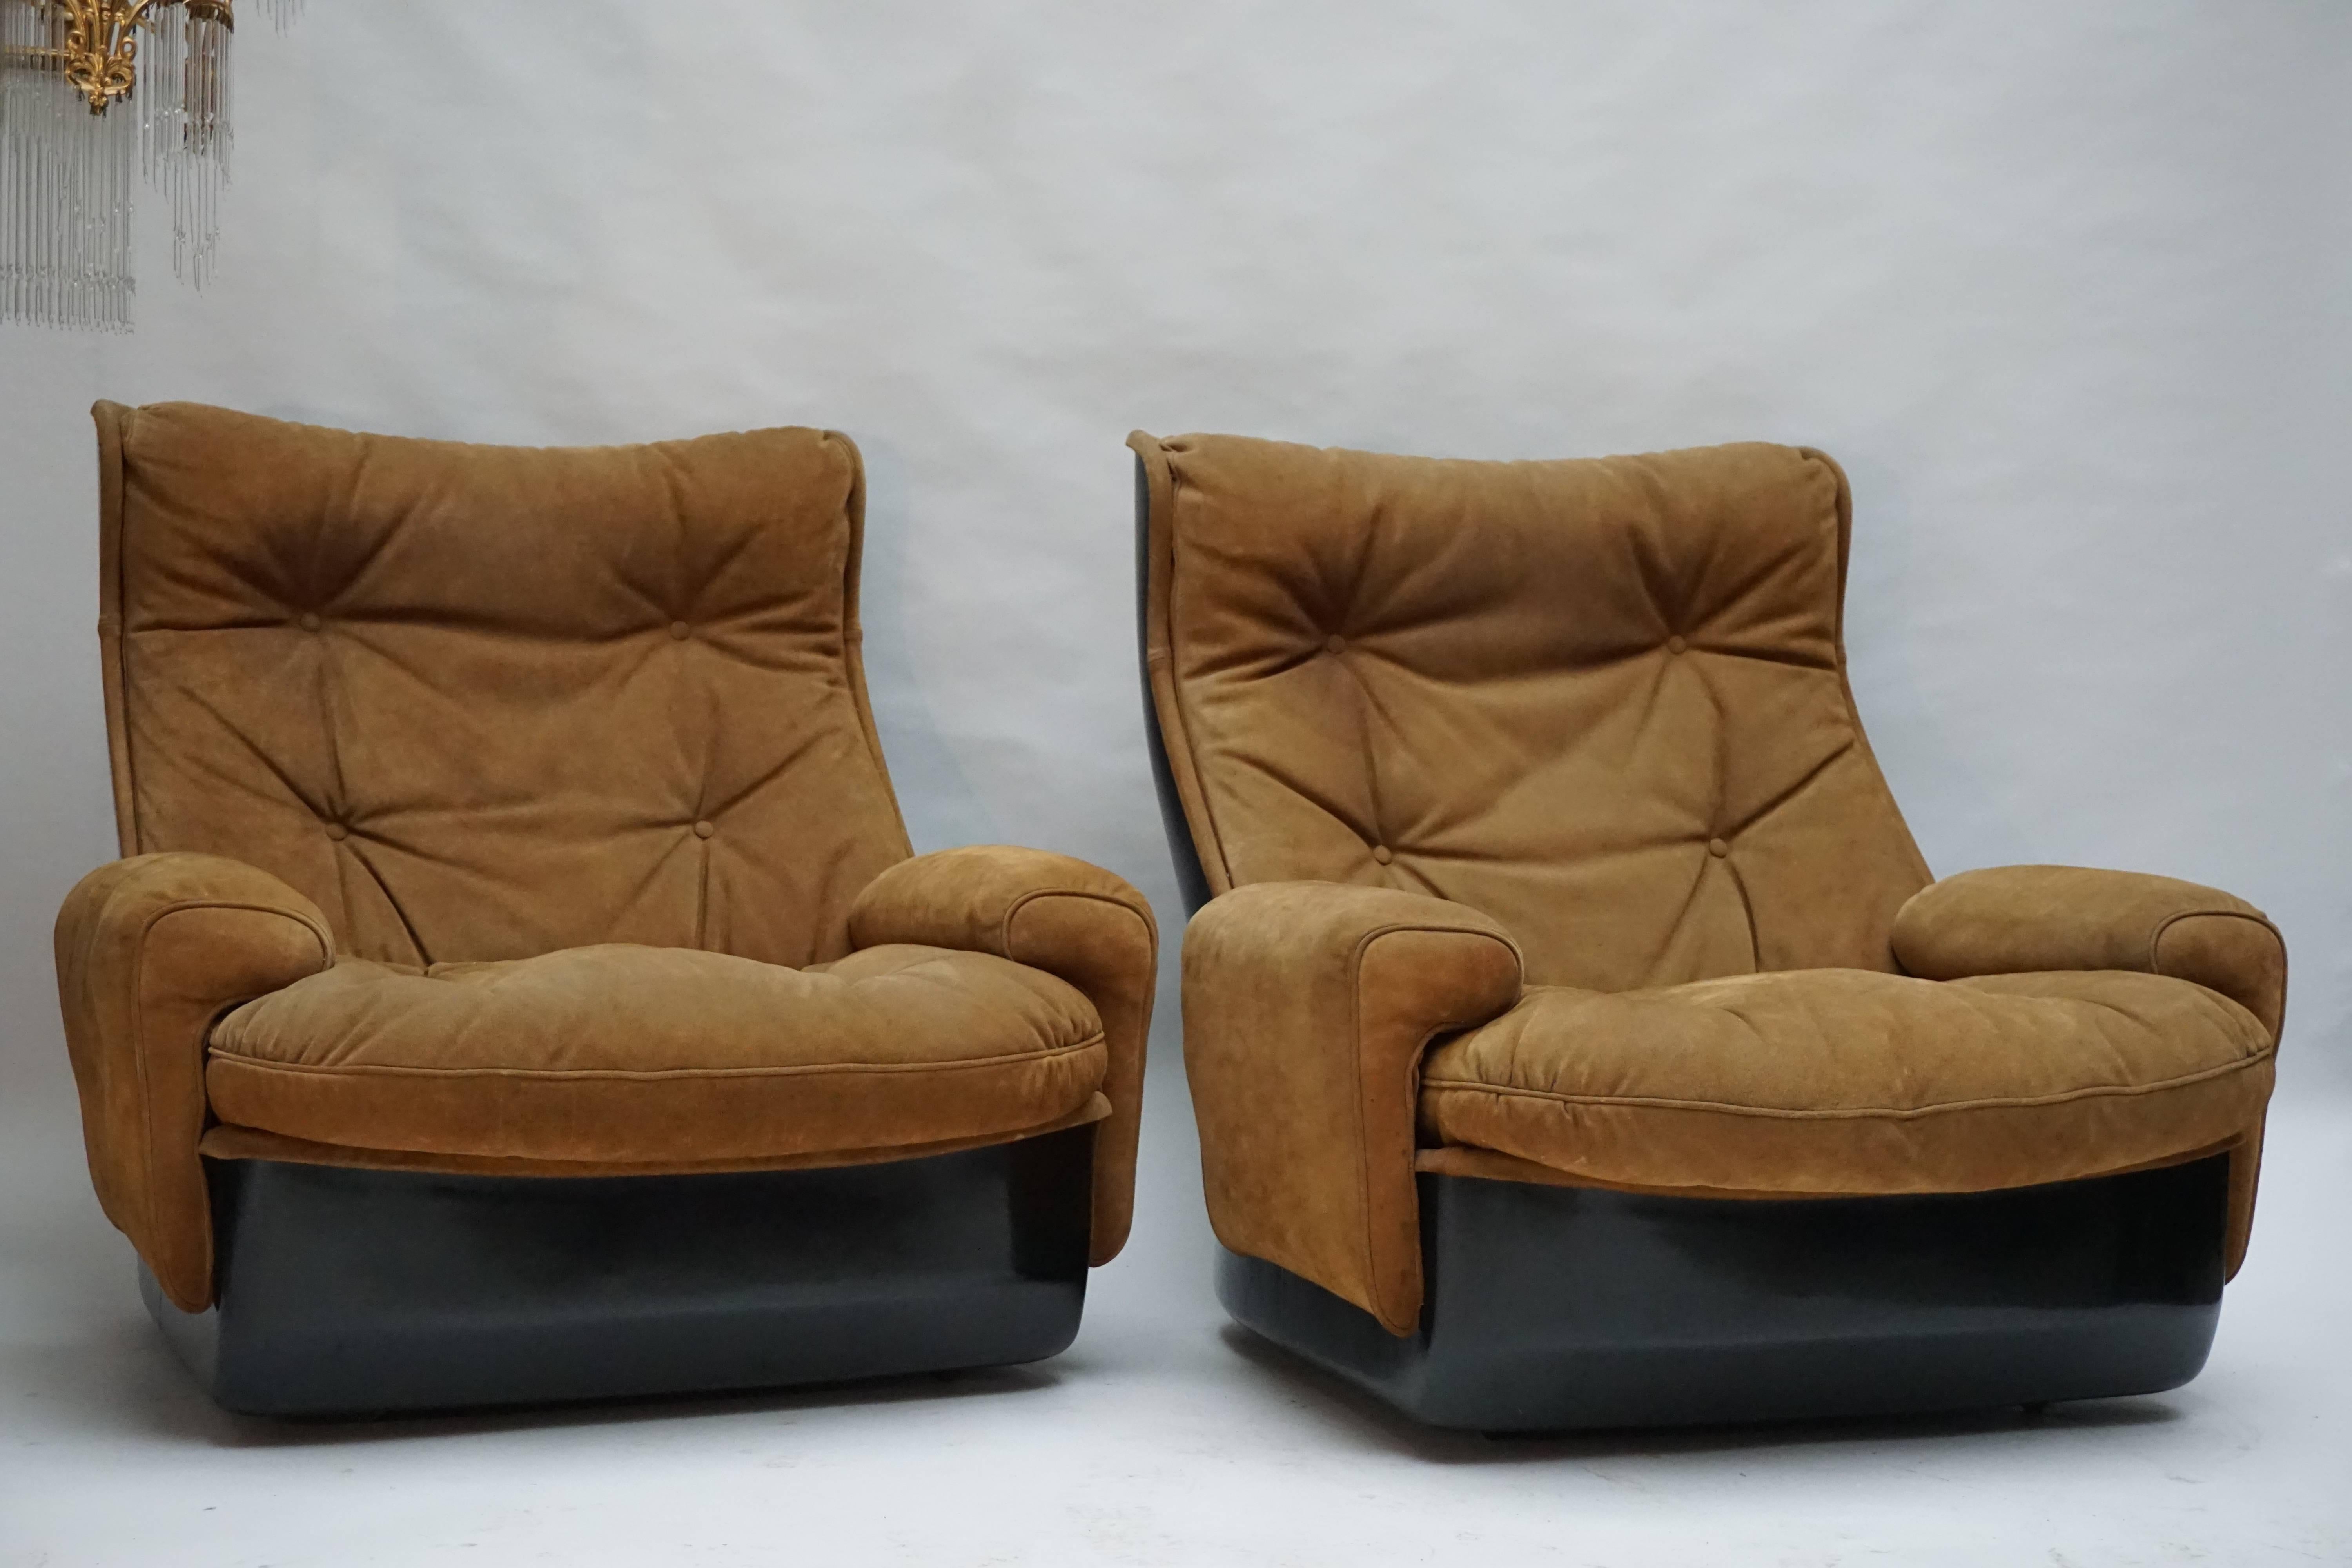 Two lounge armchairs on casters consisting by French manufacturer Airborne International.
The shells are made from black fibre glass and the seating is covered in leather buttoned upholstery.
